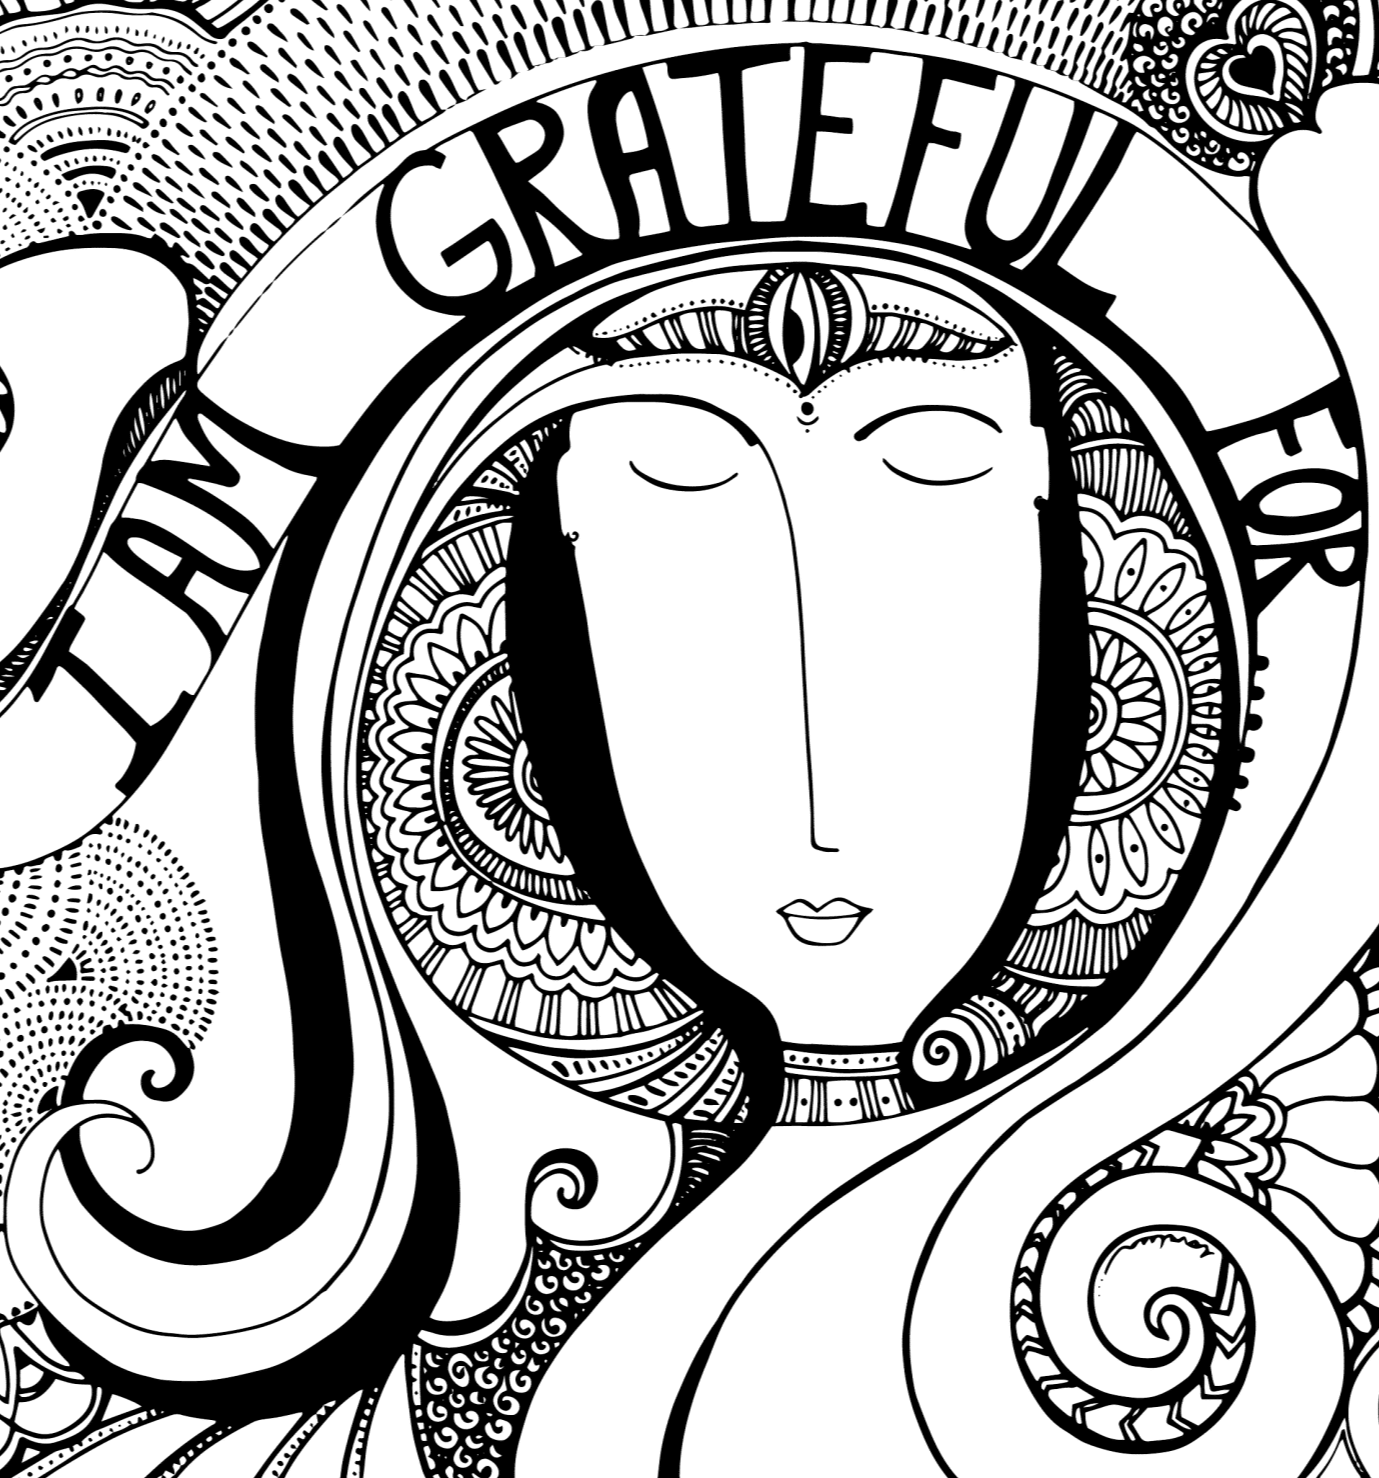 I am grateful coloring page